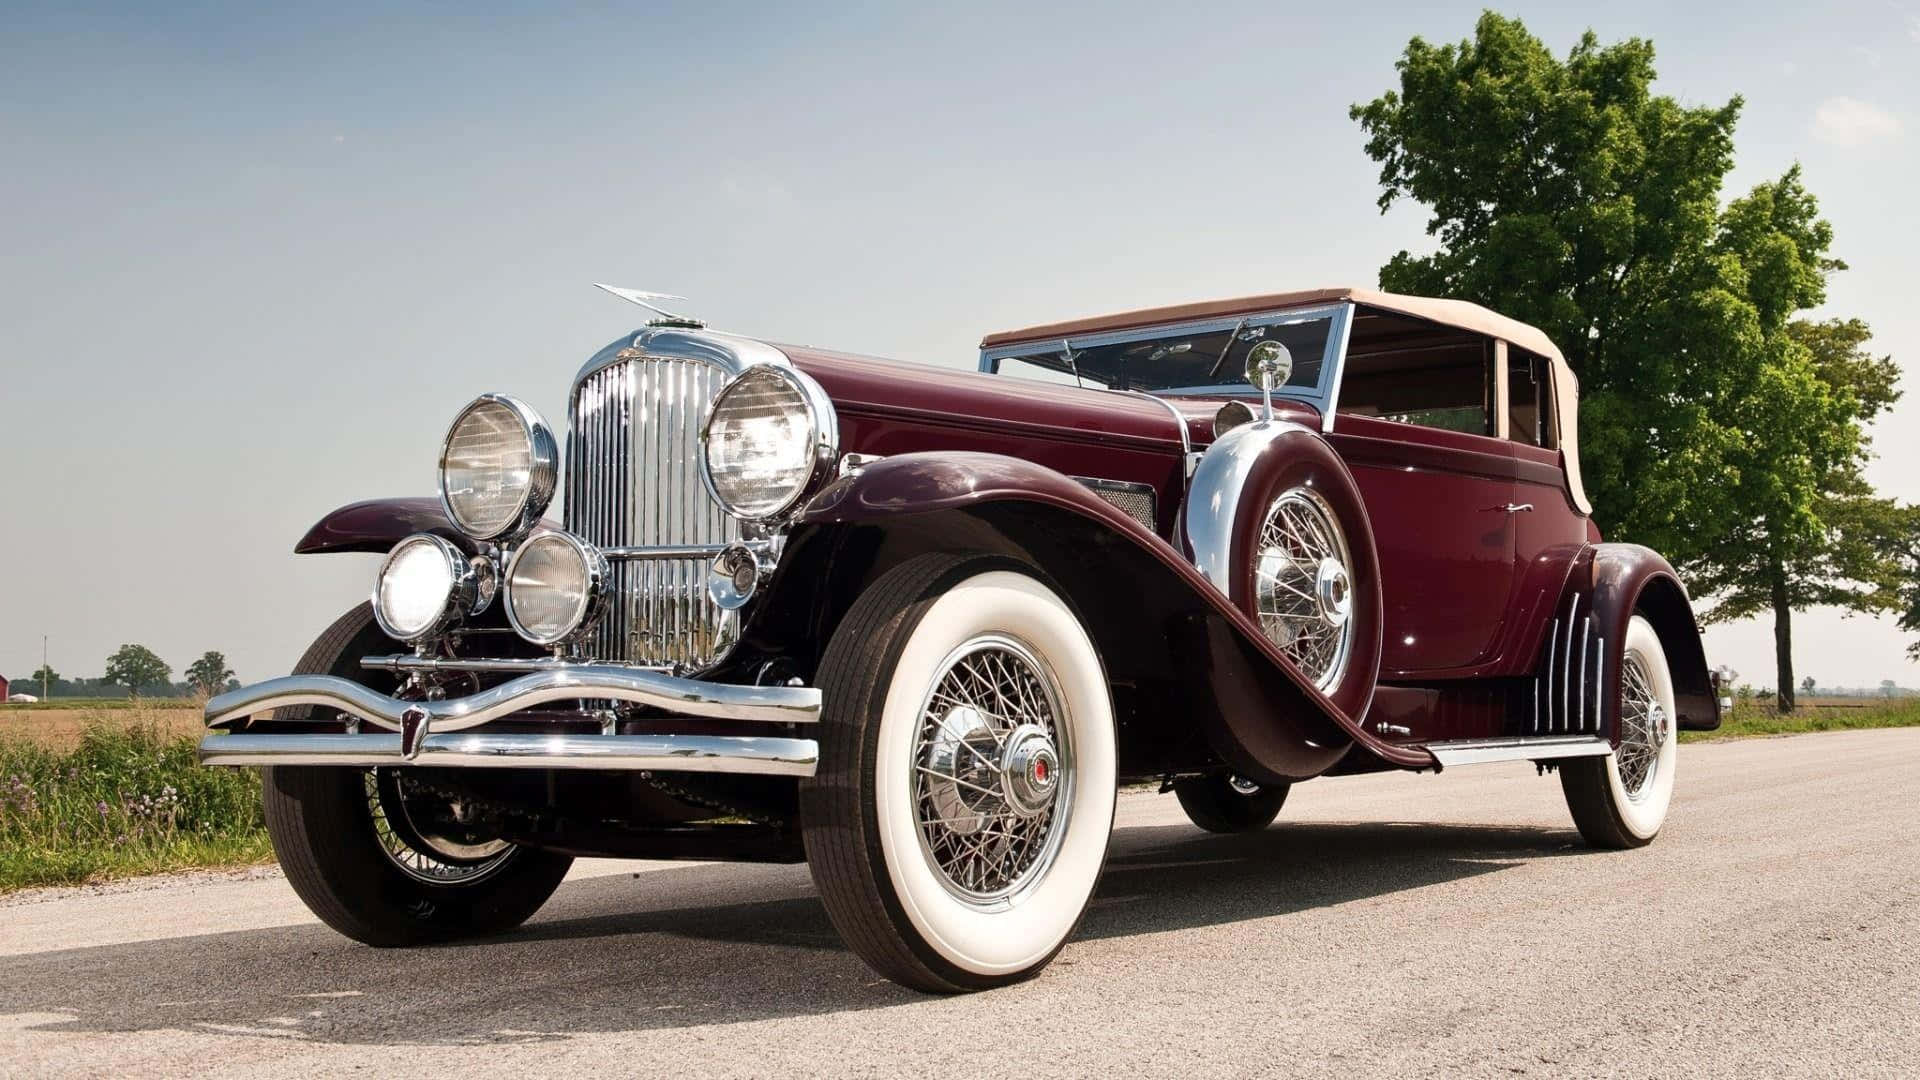 Classic Elegance: A Glossy Vintage Car in its Prime